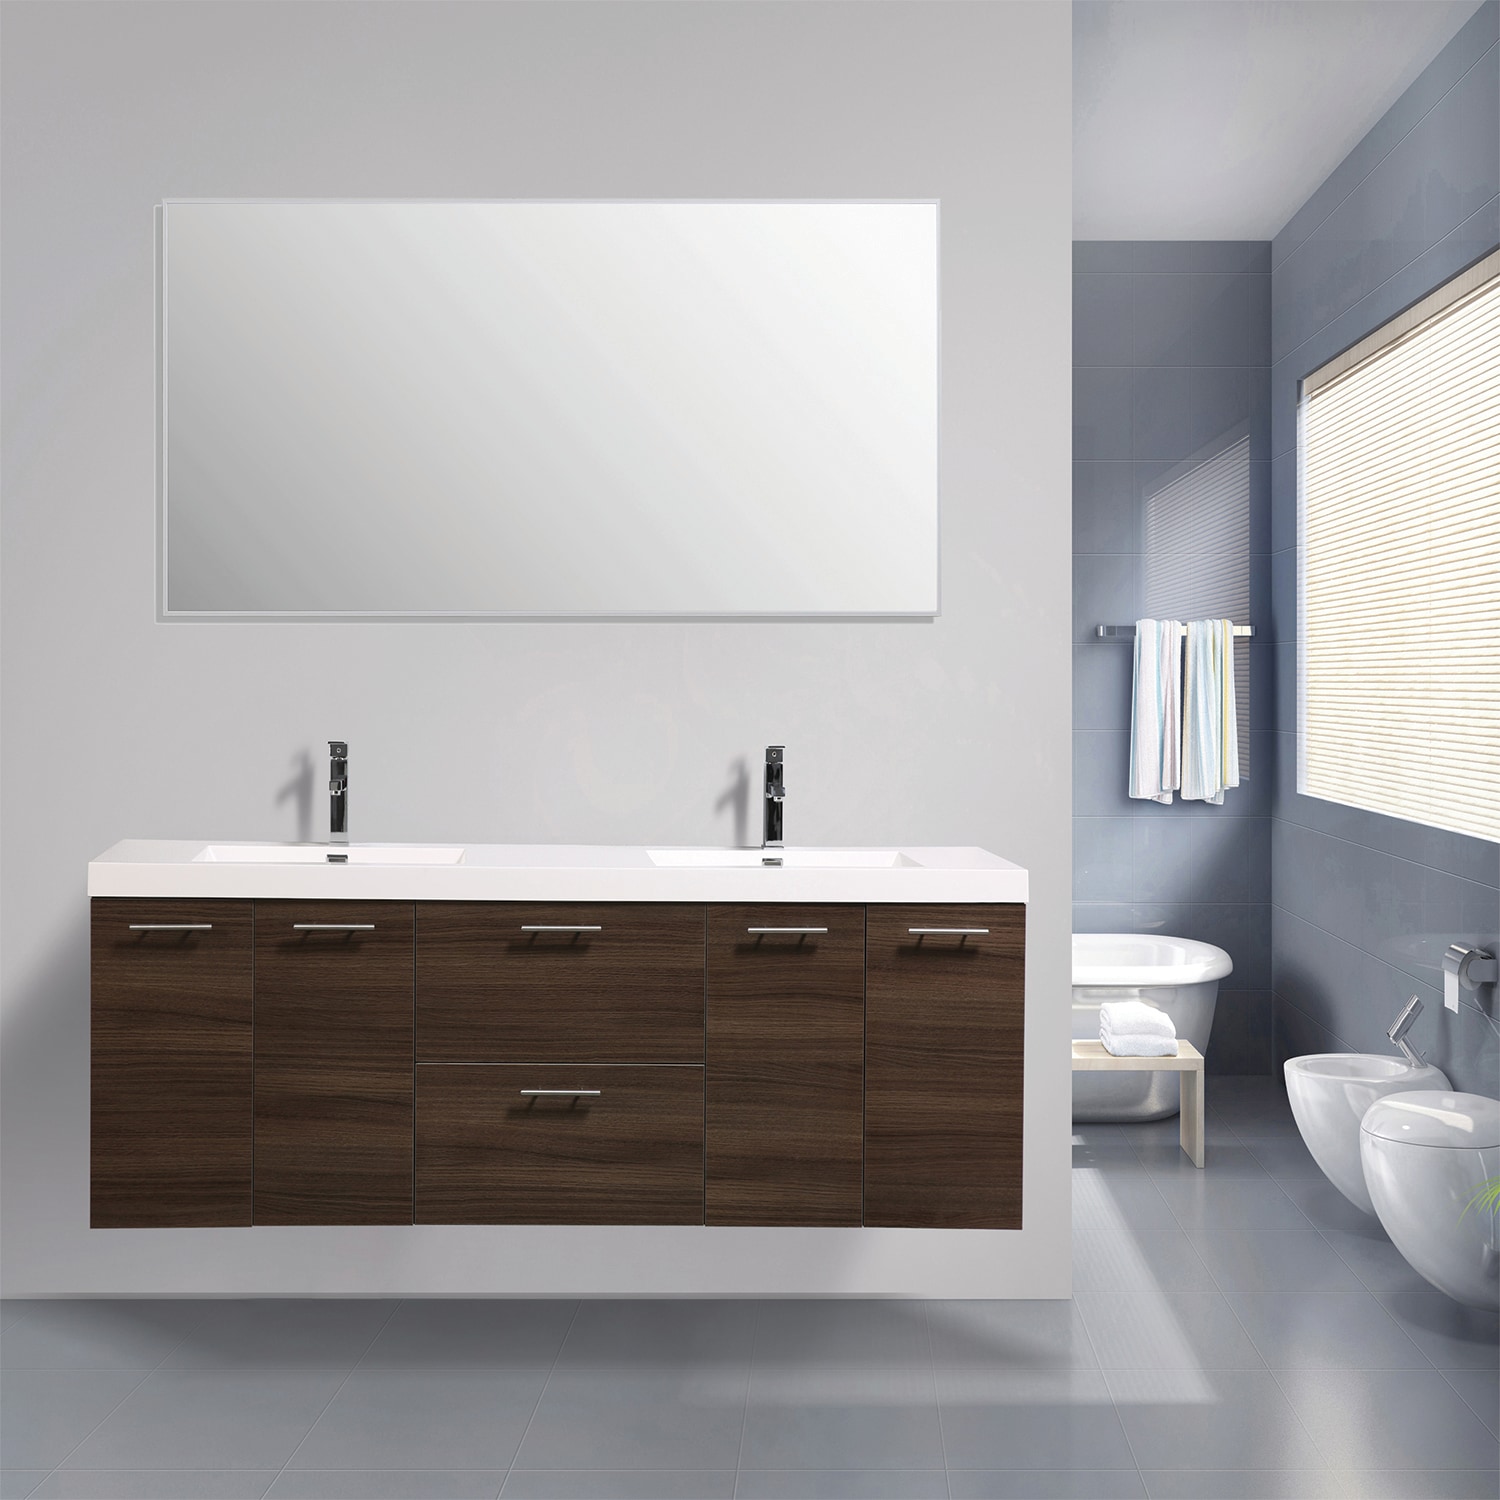 84-in Gray Oak Double Sink Floating Bathroom Vanity with White Acrylic Top | - Eviva EVVN2100-84GOK-DS